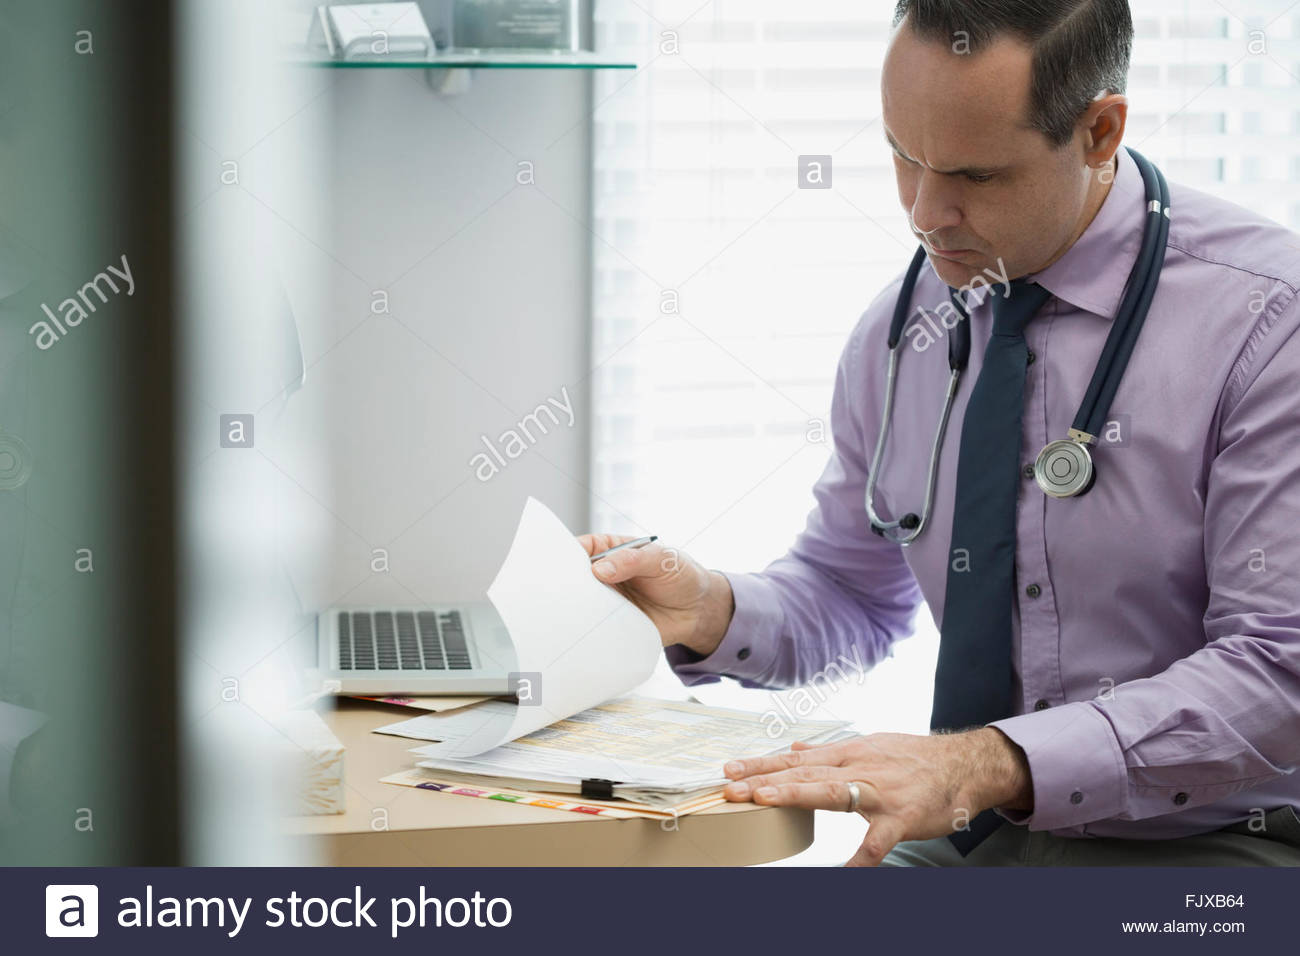 Doctor reviewing medical record Stock Photo